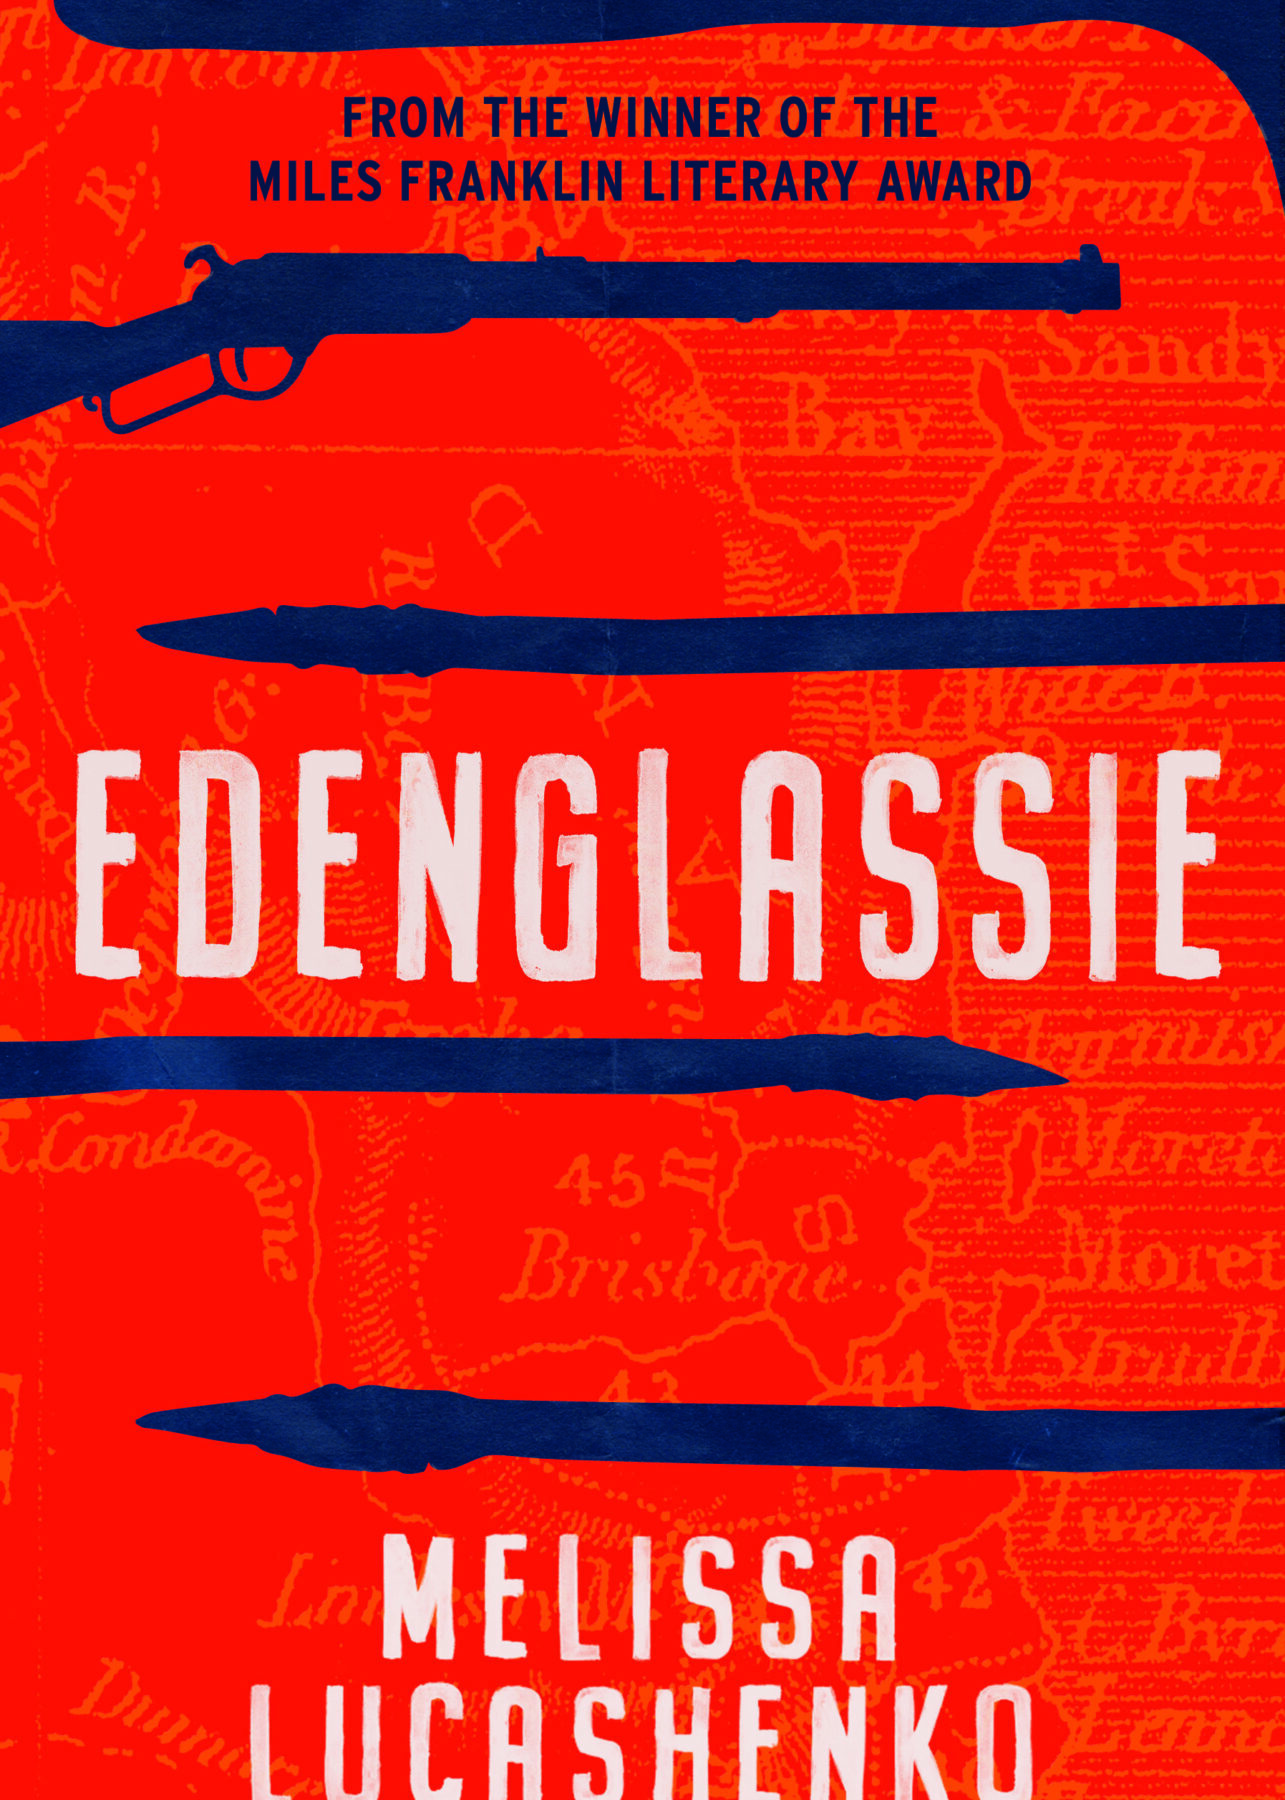 A red book cover with navy shapes of spears and a gun crossing it in horizontal lines. The title is in the centre in white uppercase lettering